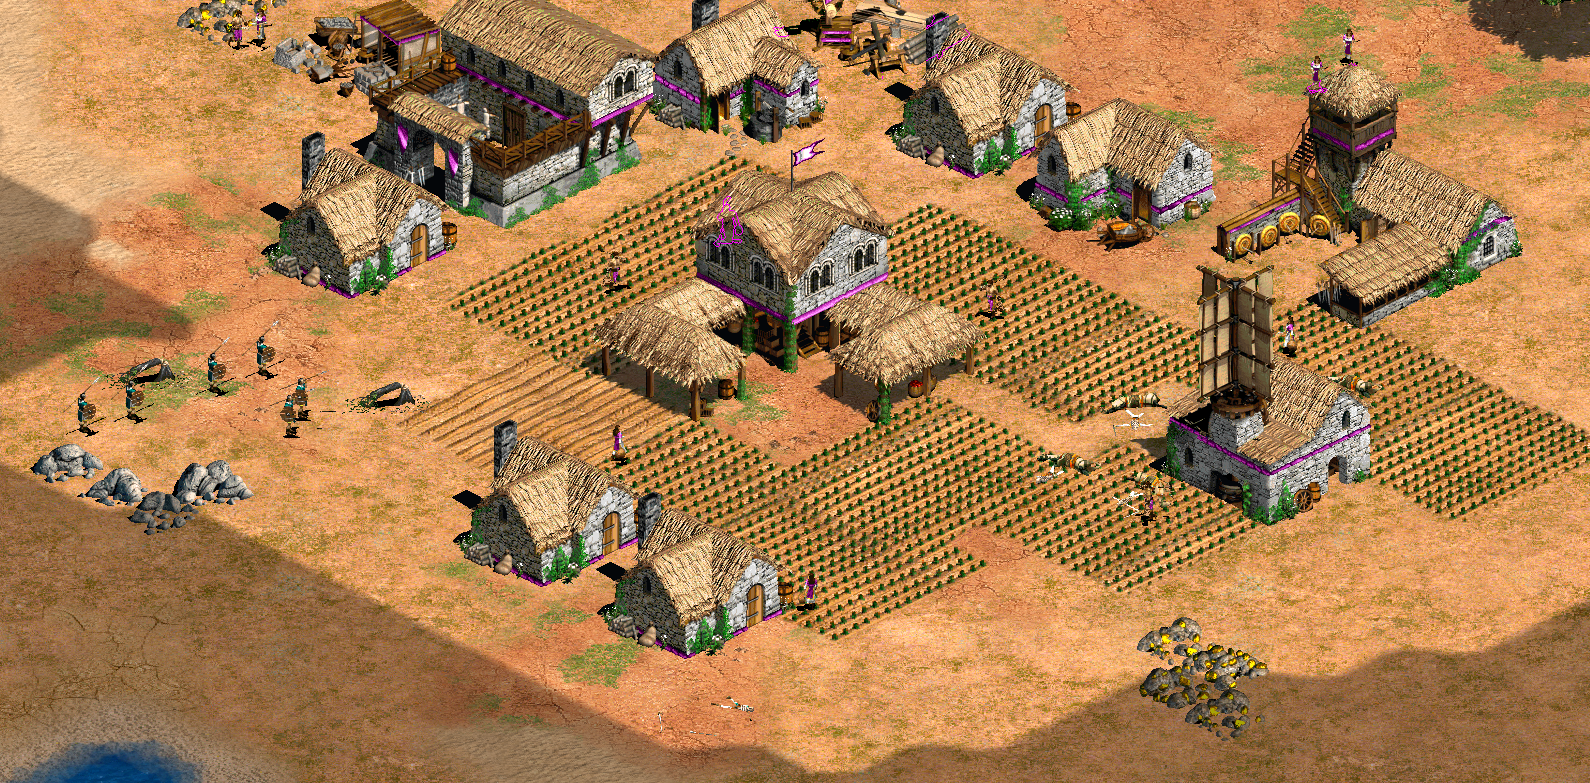 age of empires 2 town center